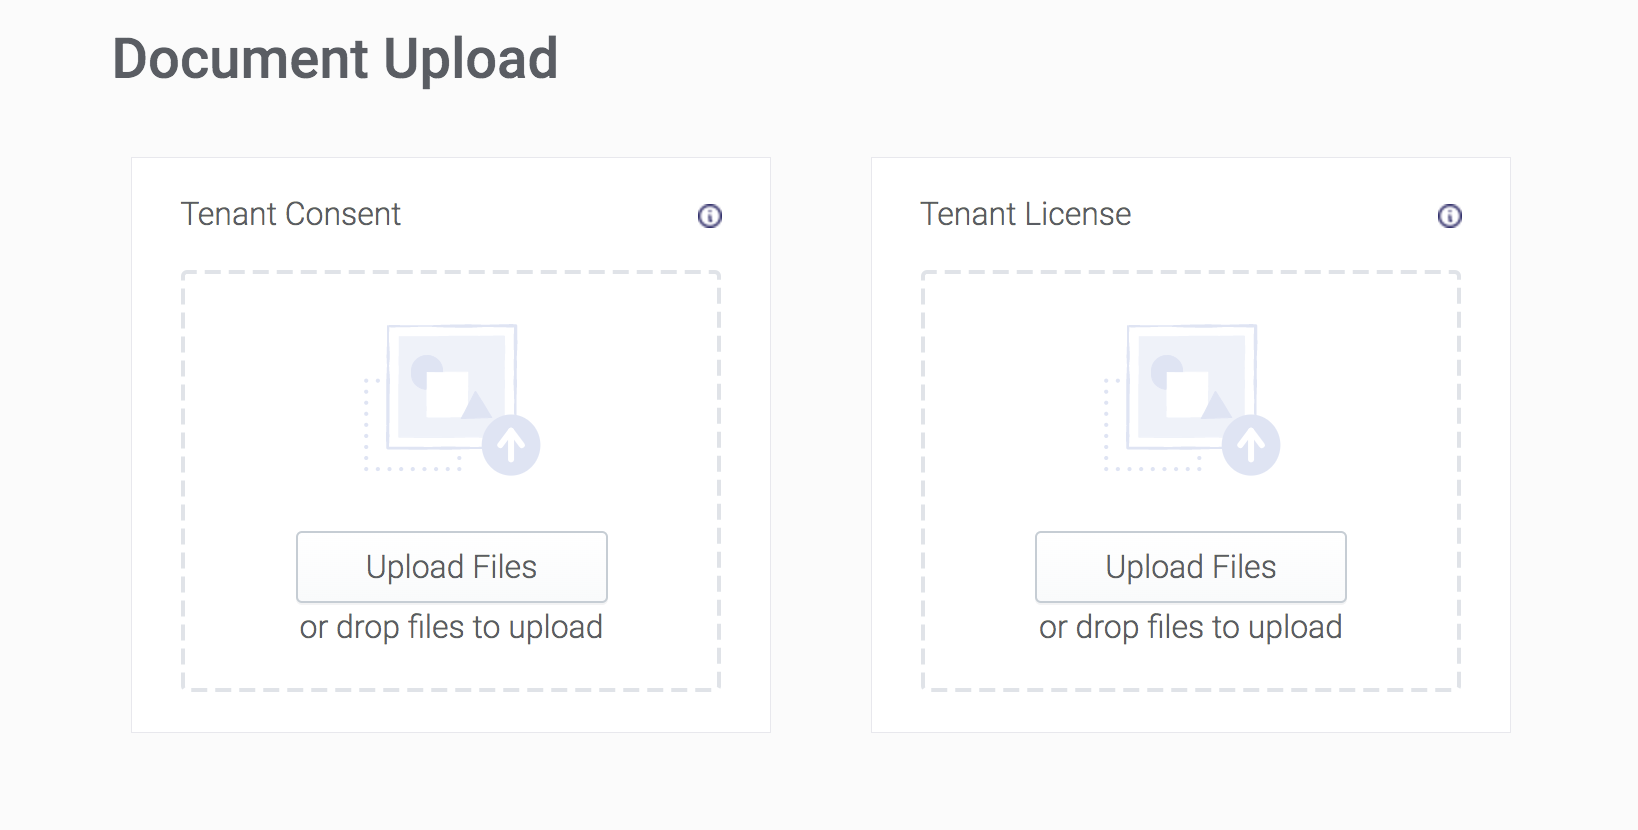 This is Step 1, Option 2, “Document Upload”, of how to screen tenants using SingleKey's platform. 